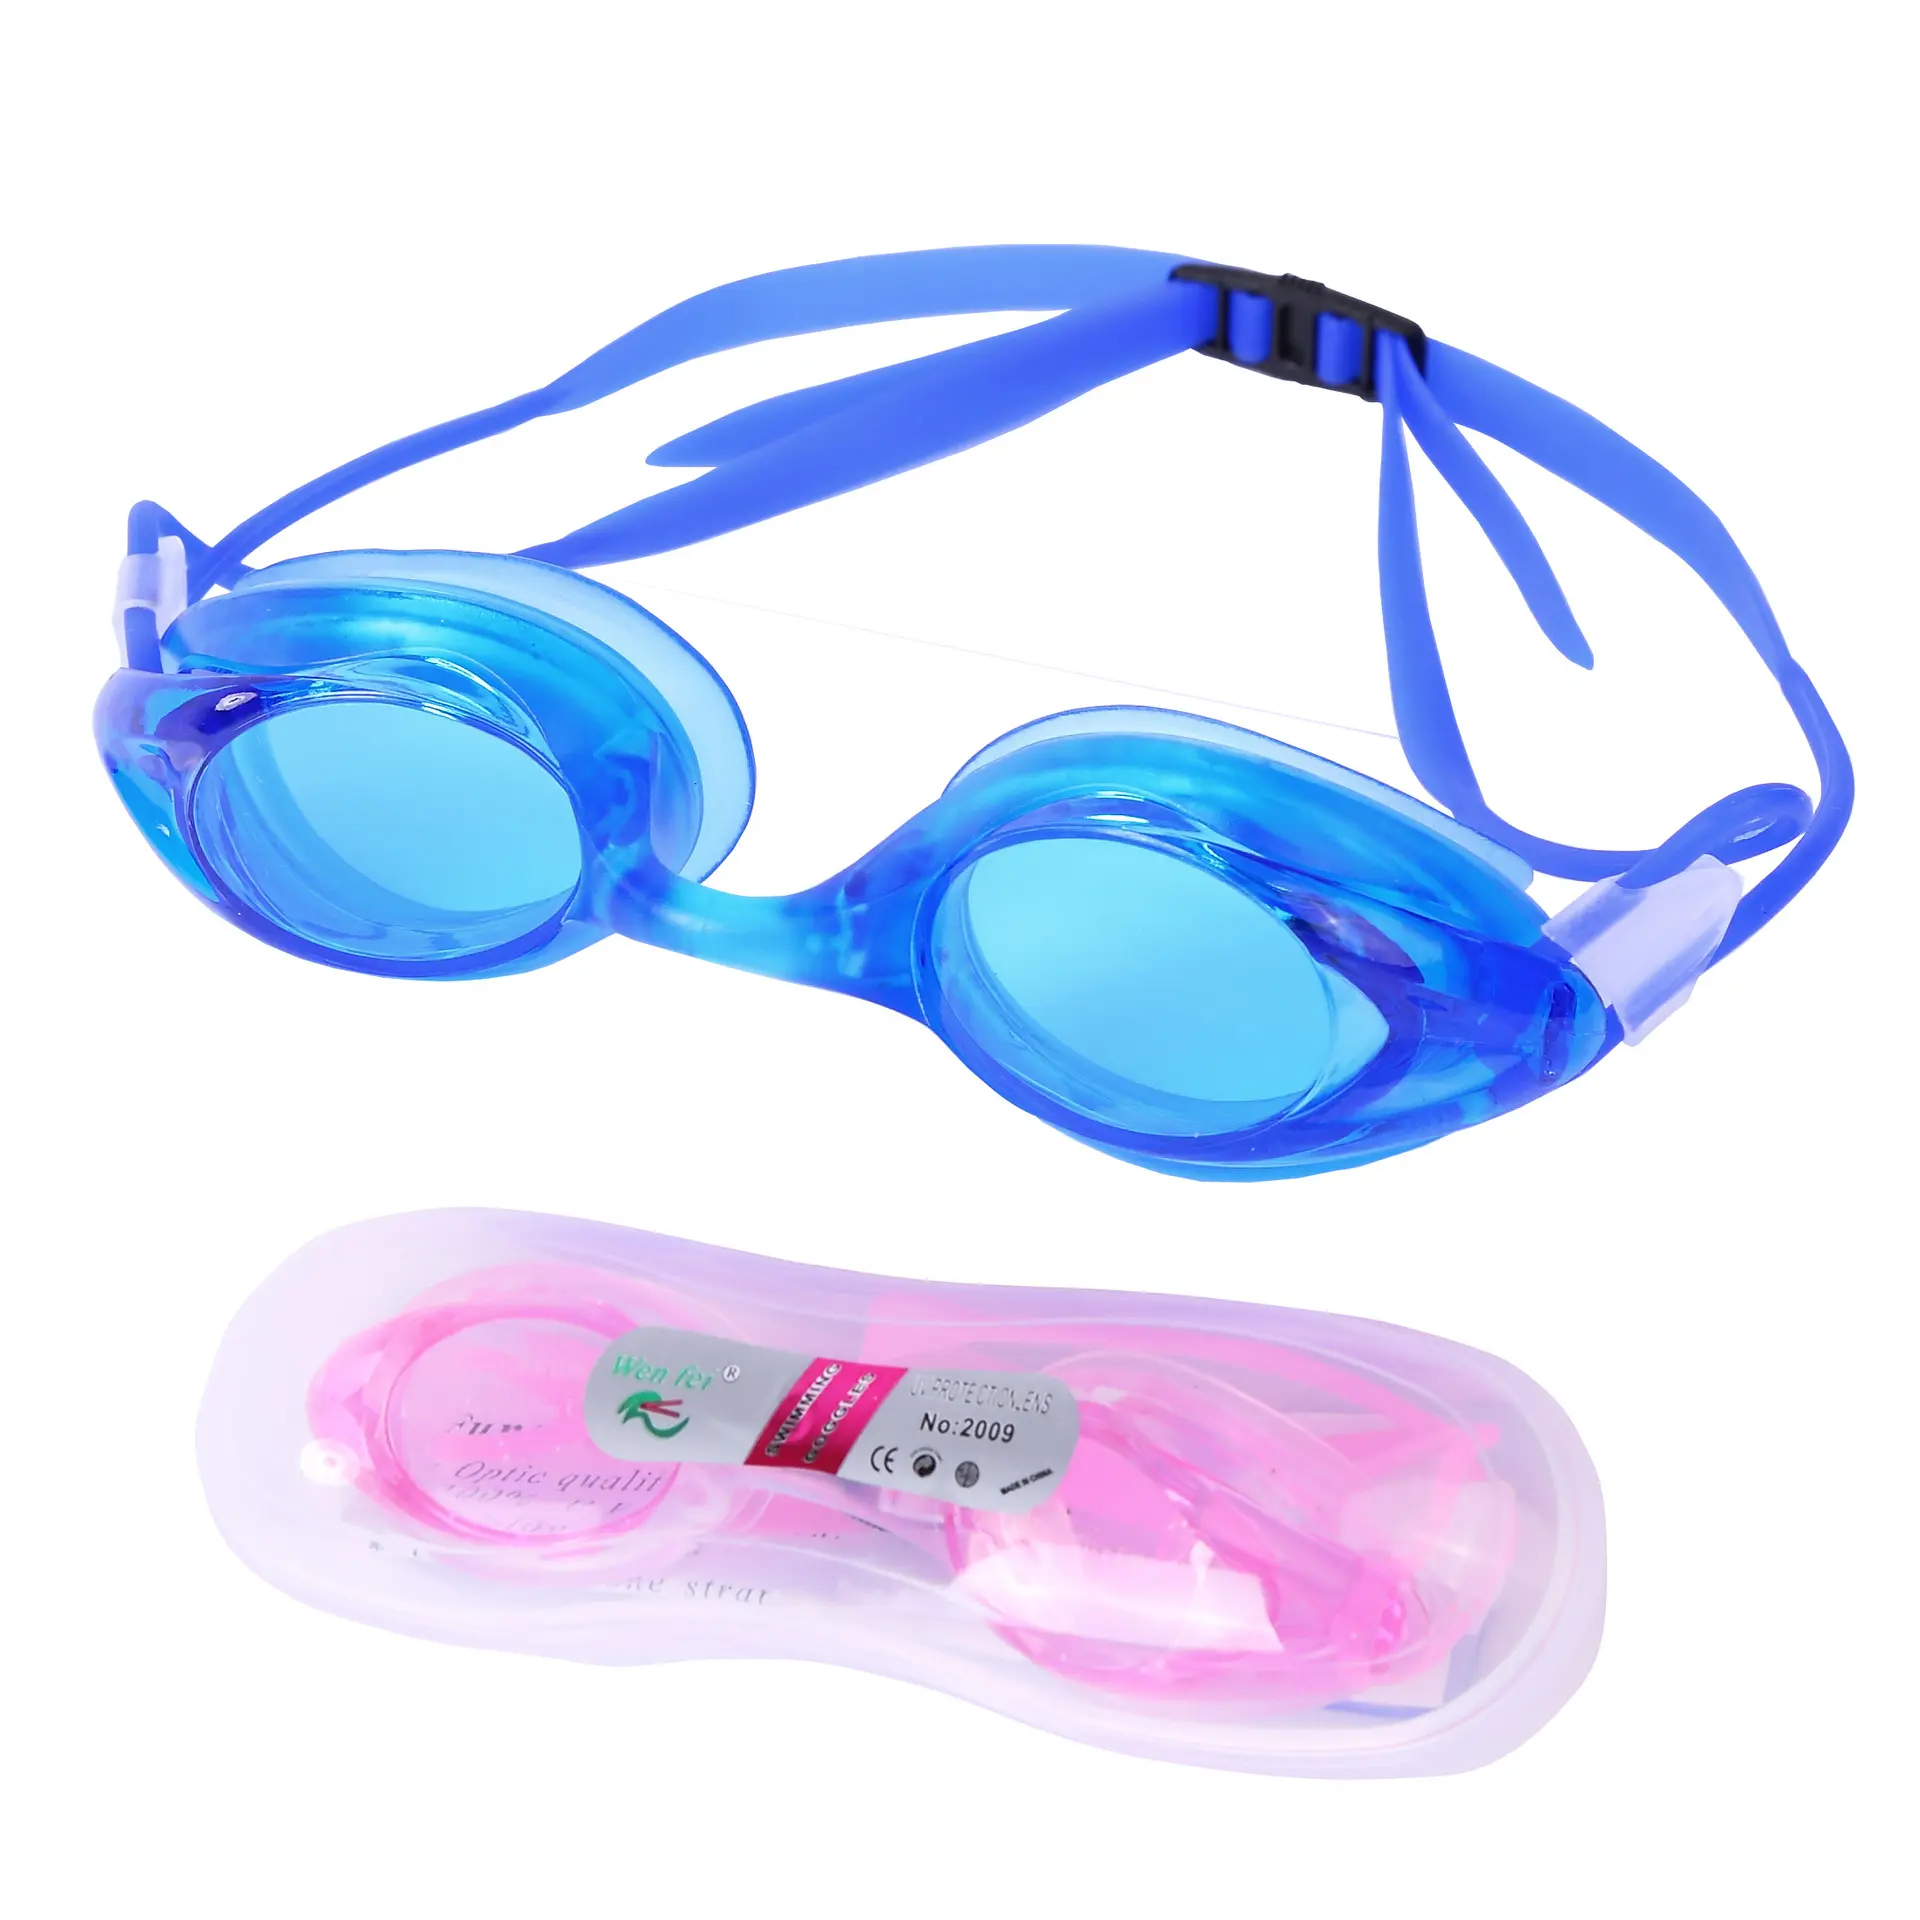 Black Adjustable Hd Diving Goggles Adult Silicone Swimming Goggles